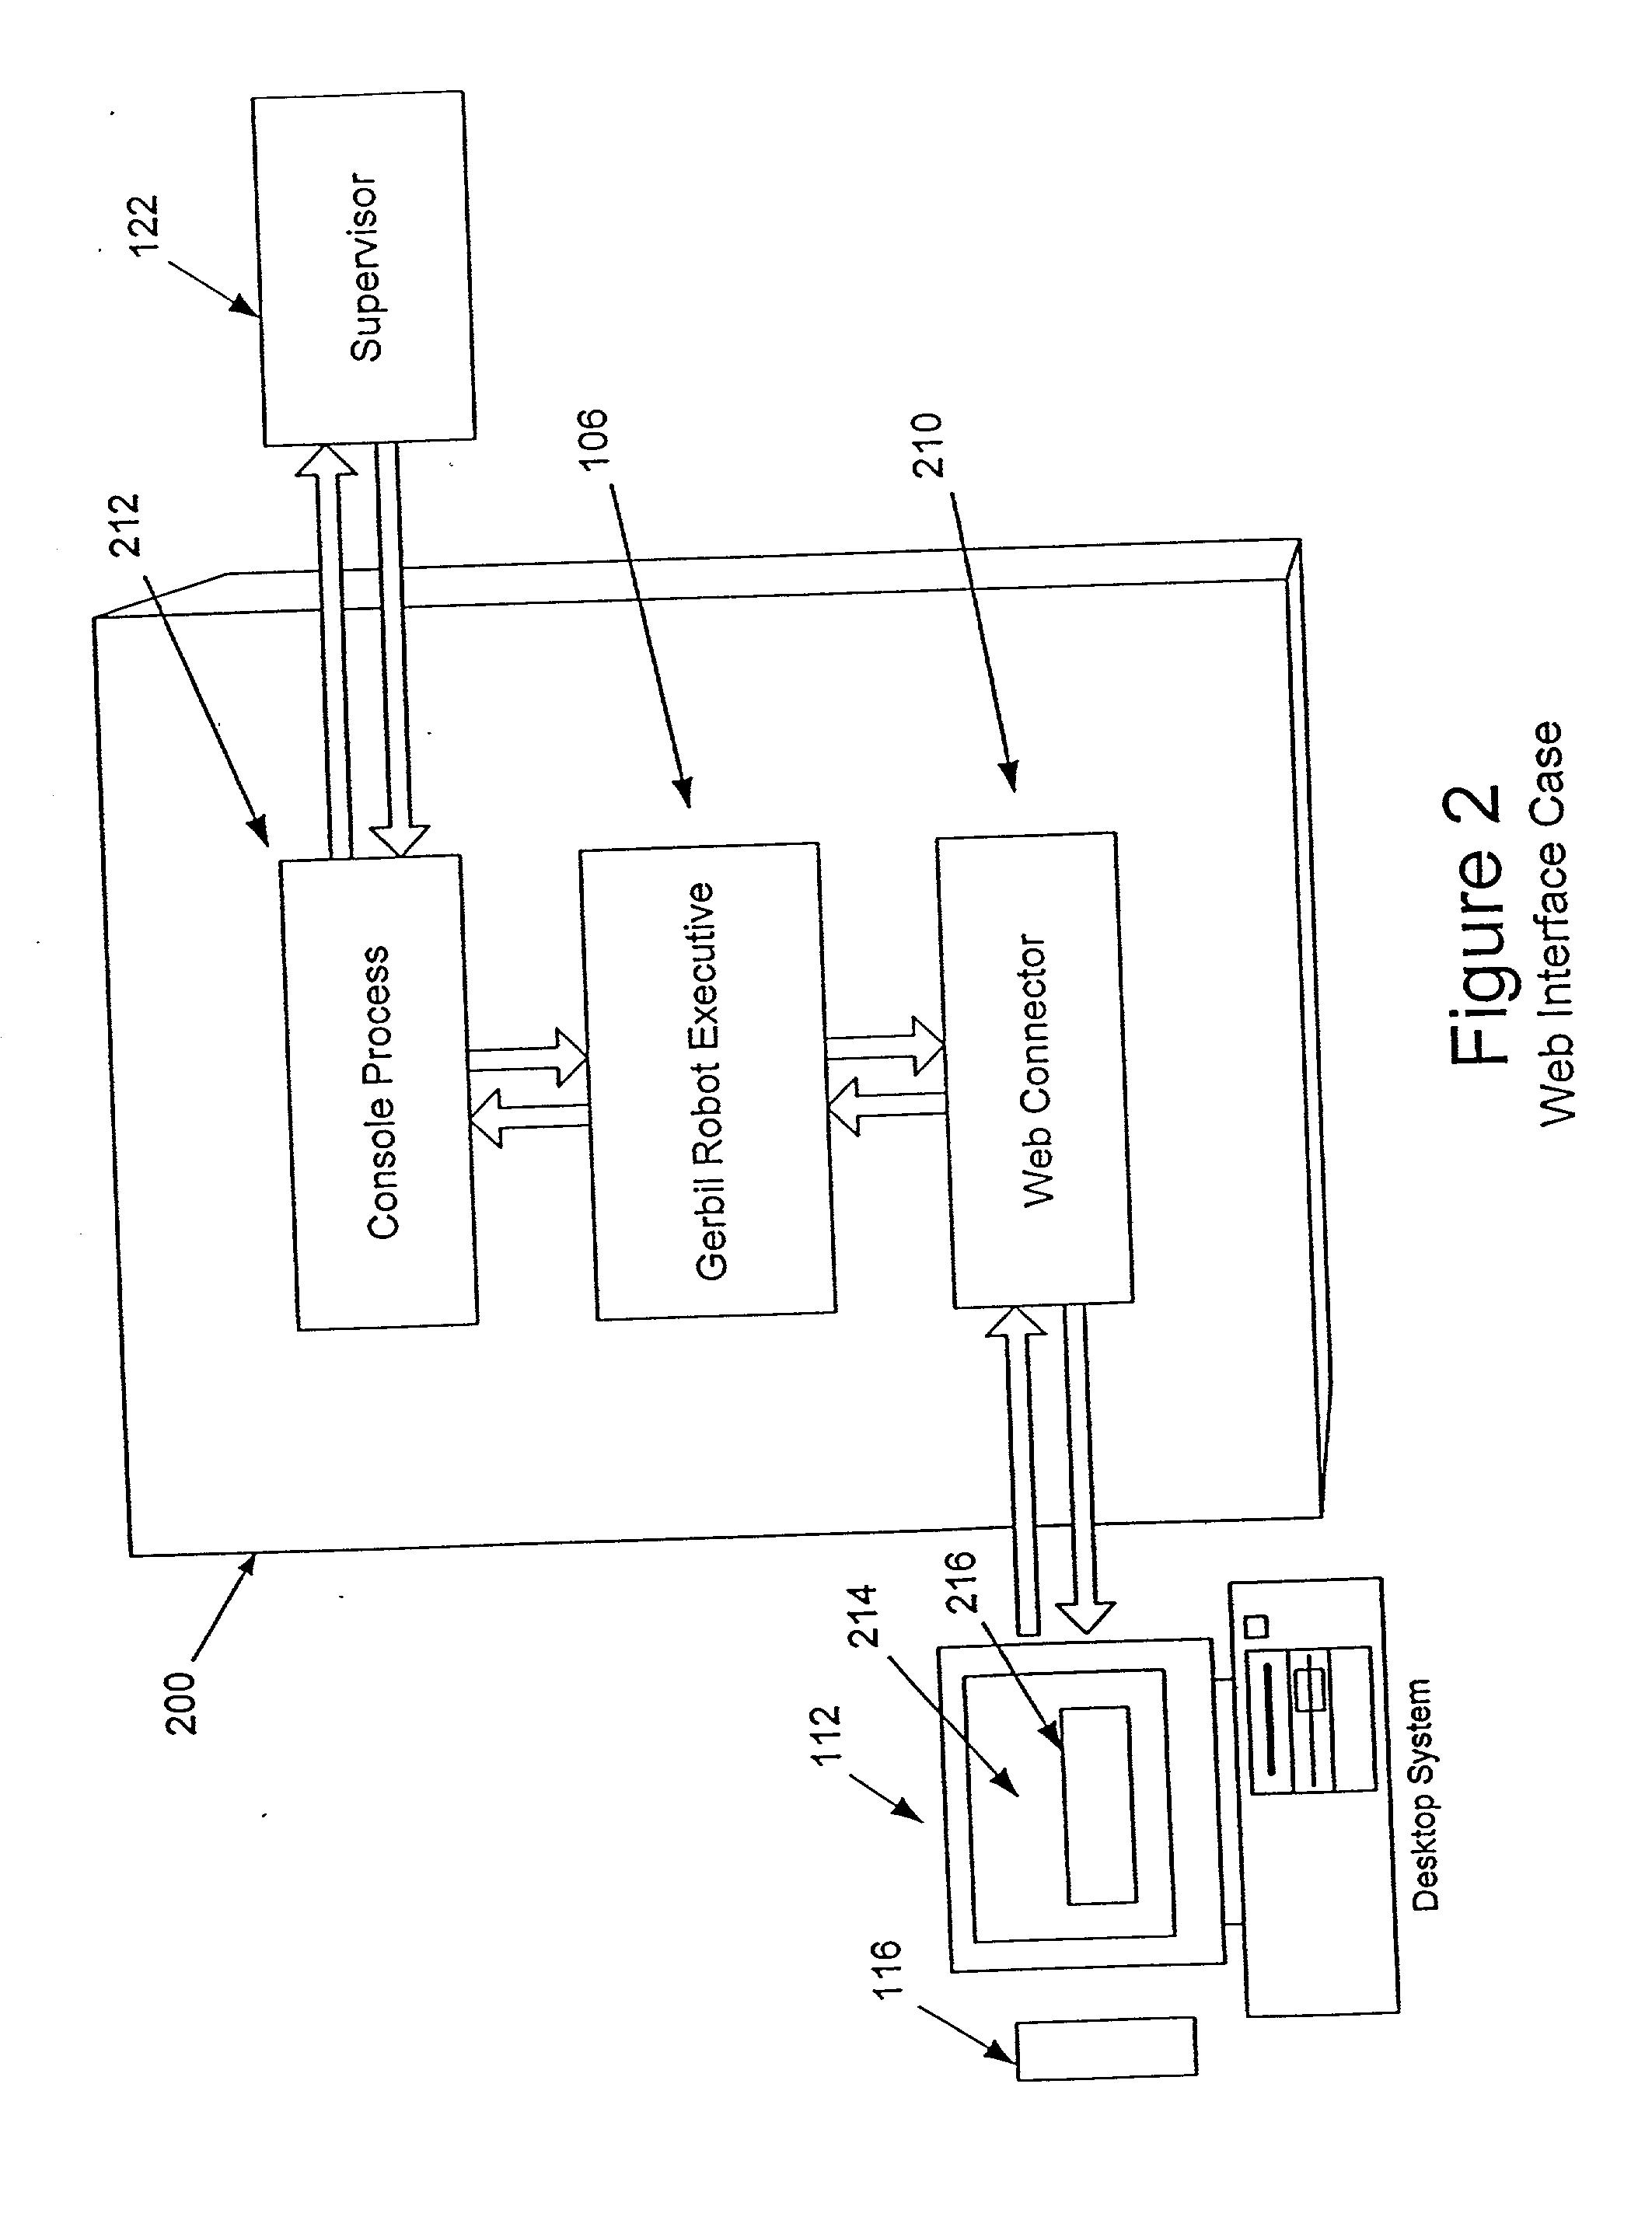 Methods for automatically focusing the attention of a virtual robot interacting with users